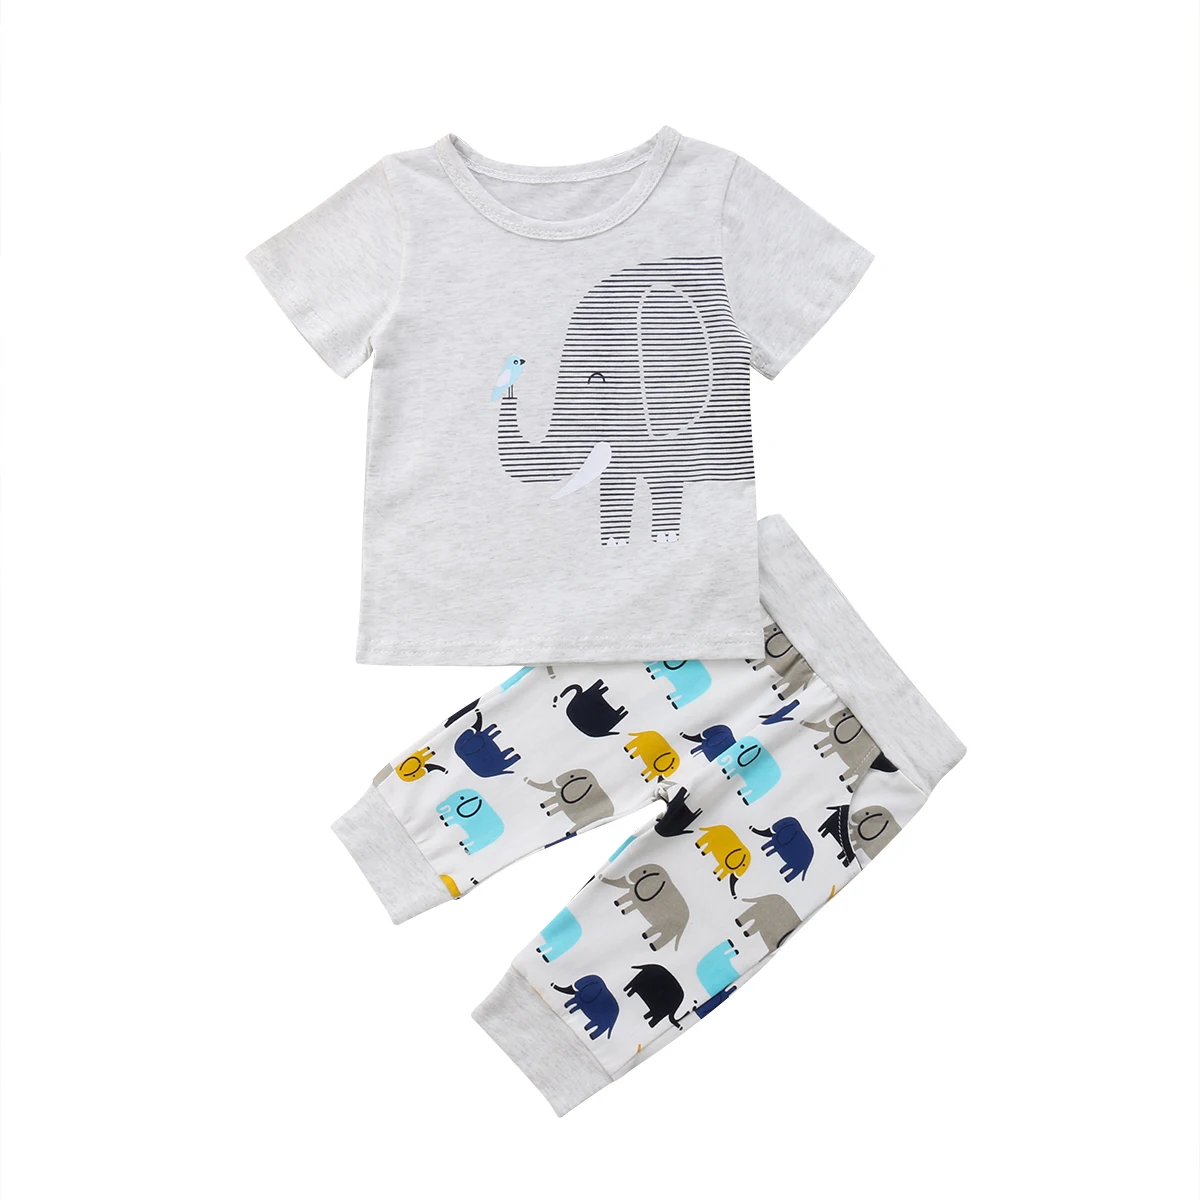 UK Newborn Baby Boys Girls Hoodie T-shirt Tops+Pants Outfits Toddler Clothes Set 